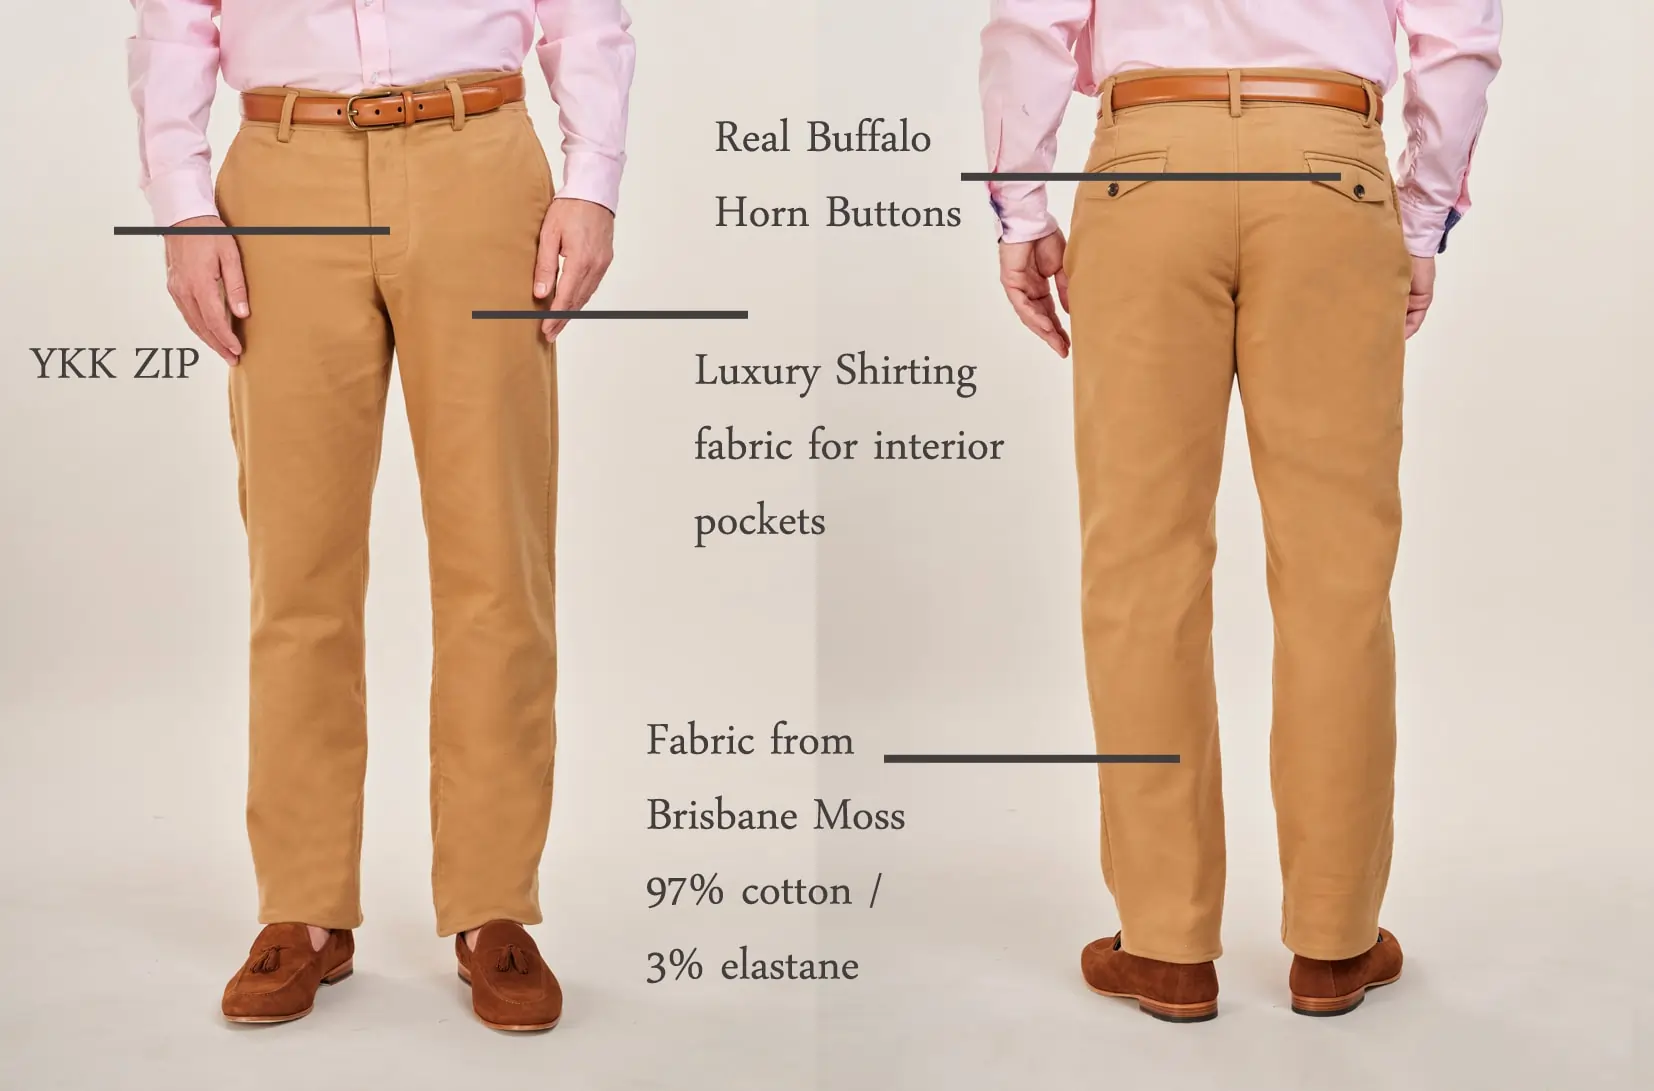 The 14 Best Men's Pants Colors That Make Guys Look Great